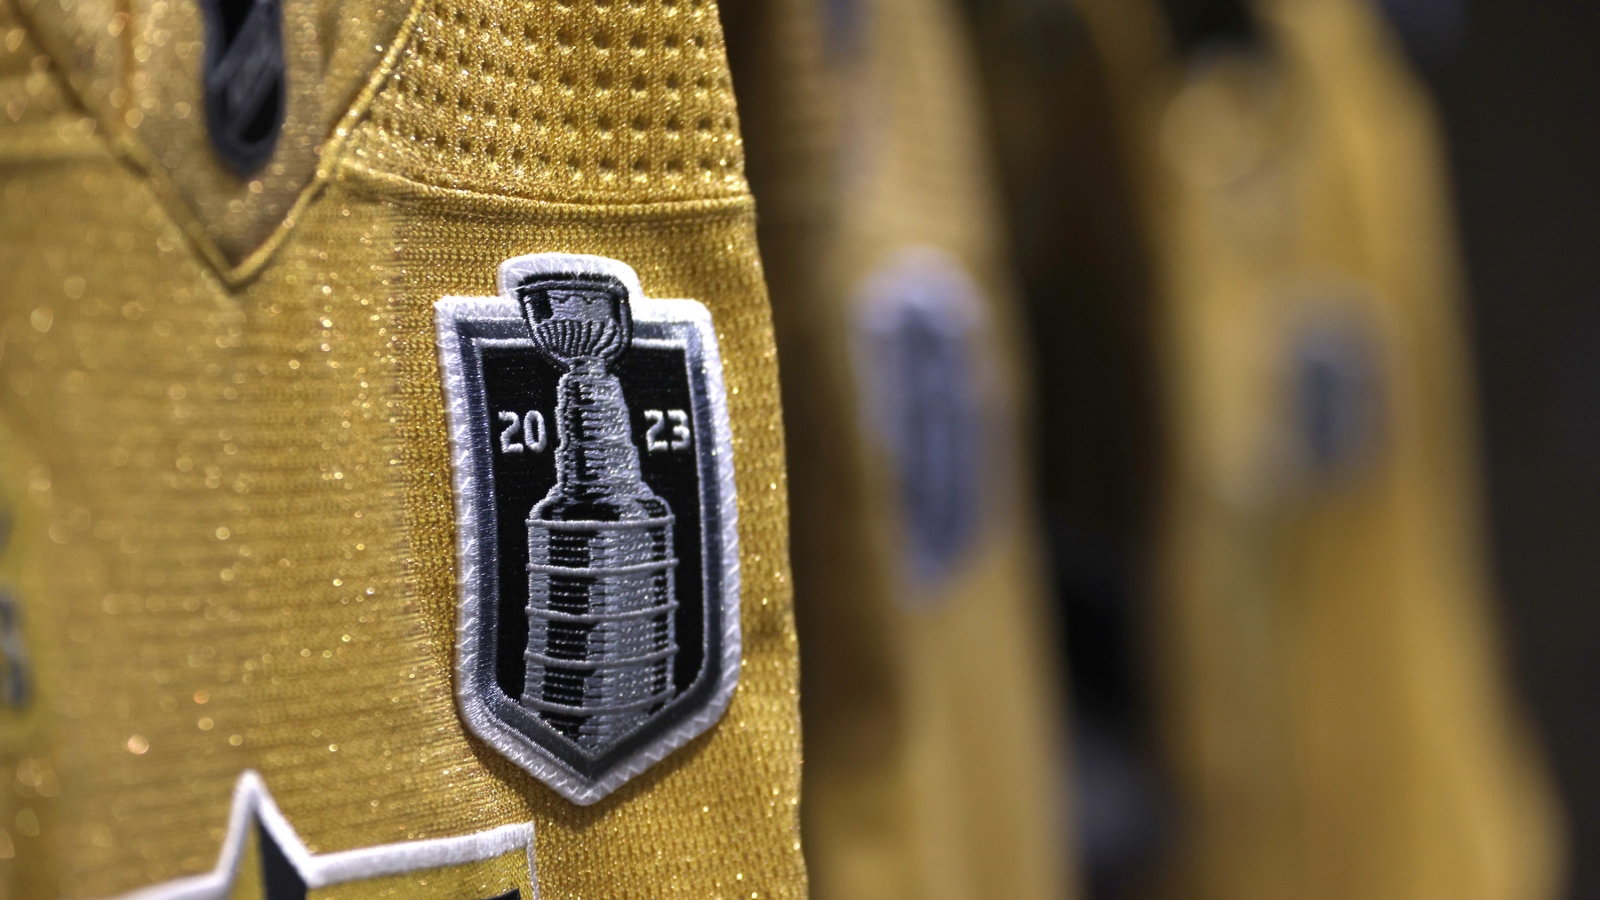 Blues unveil Stanley Cup Championship rings 